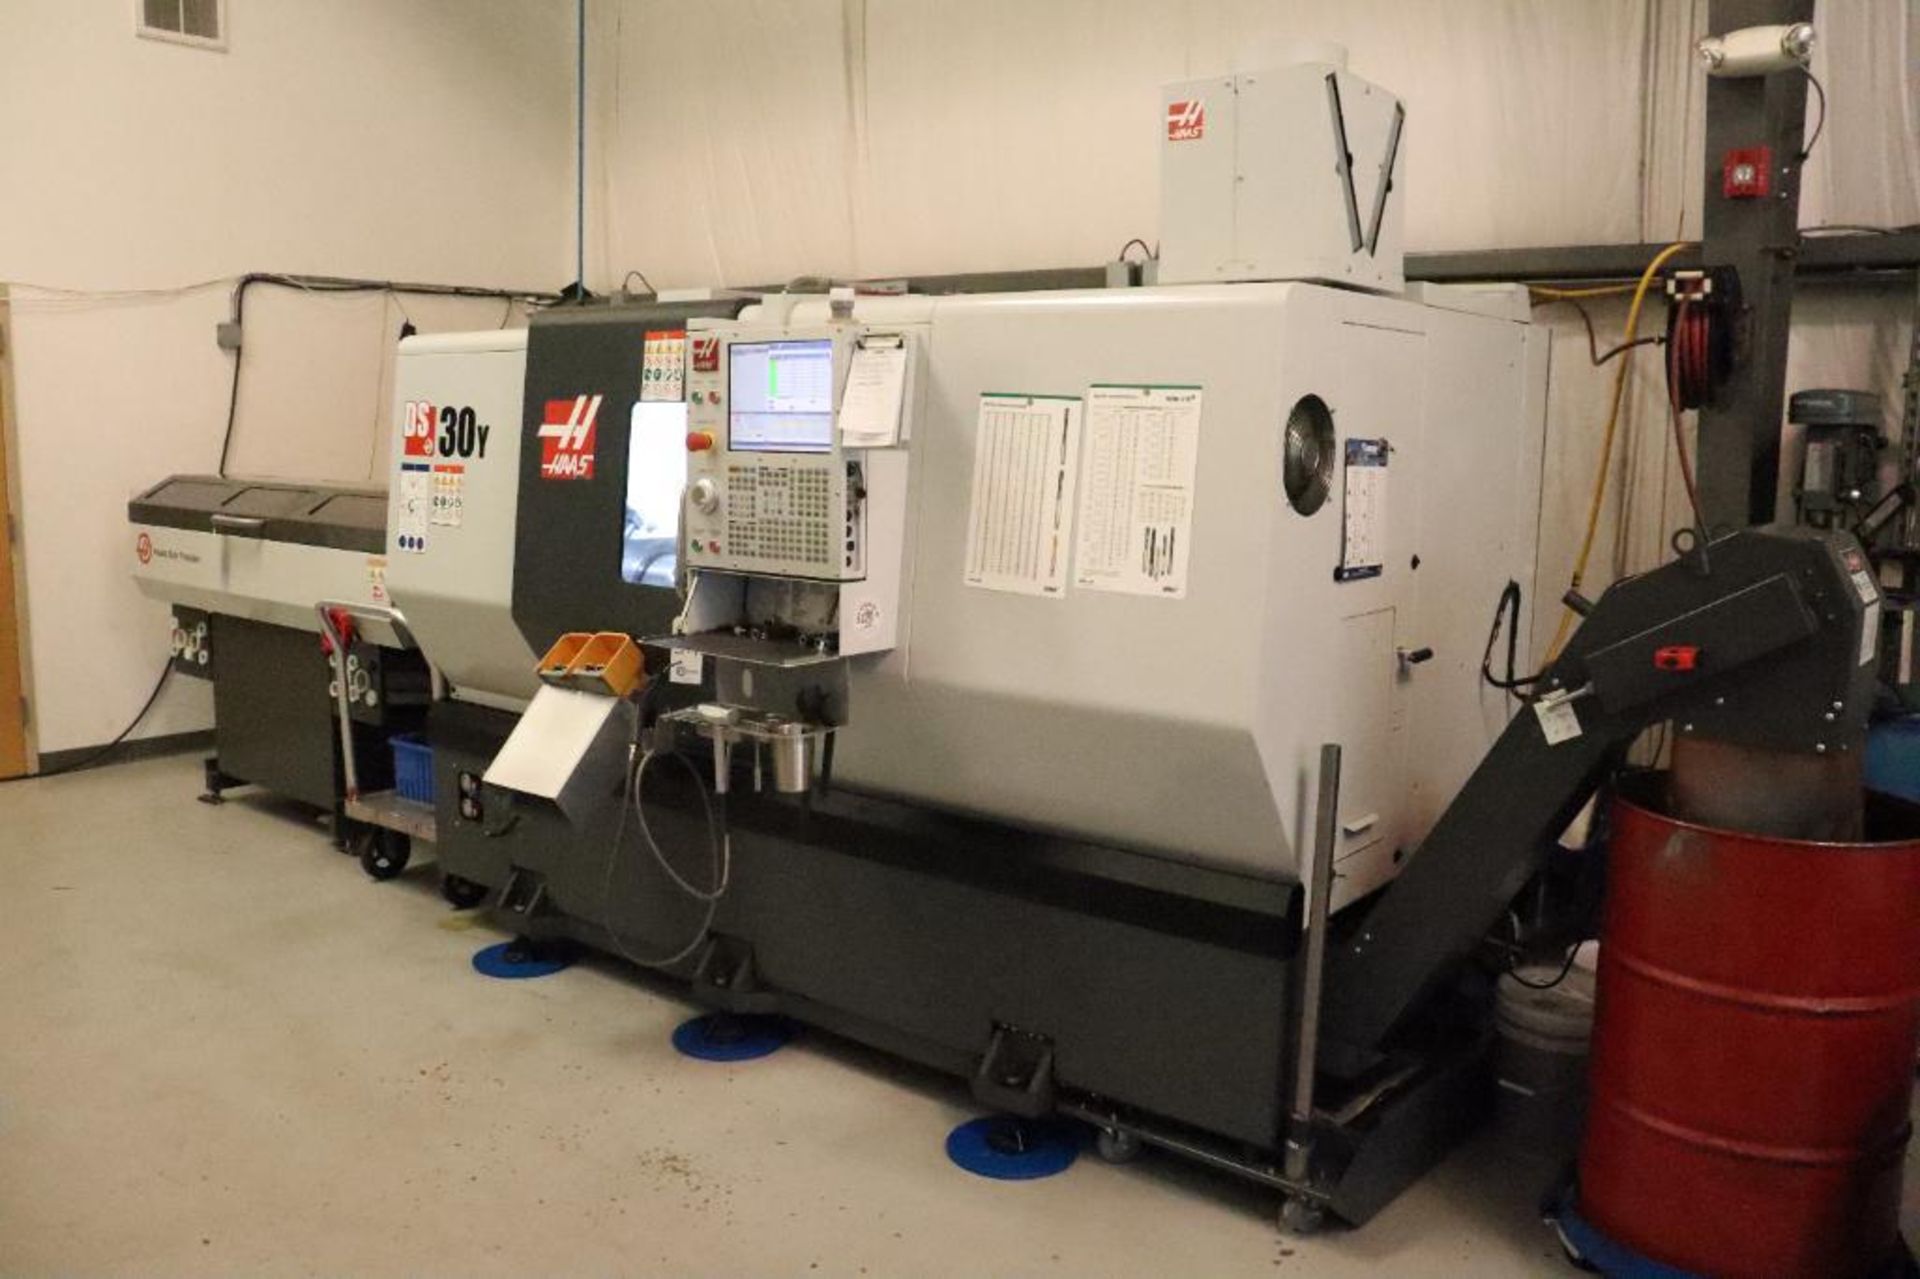 2021 Haas DS-30Y Dual Spindle Turning Center w/ bar feeder, Live tooling, Low hours! - Image 22 of 22